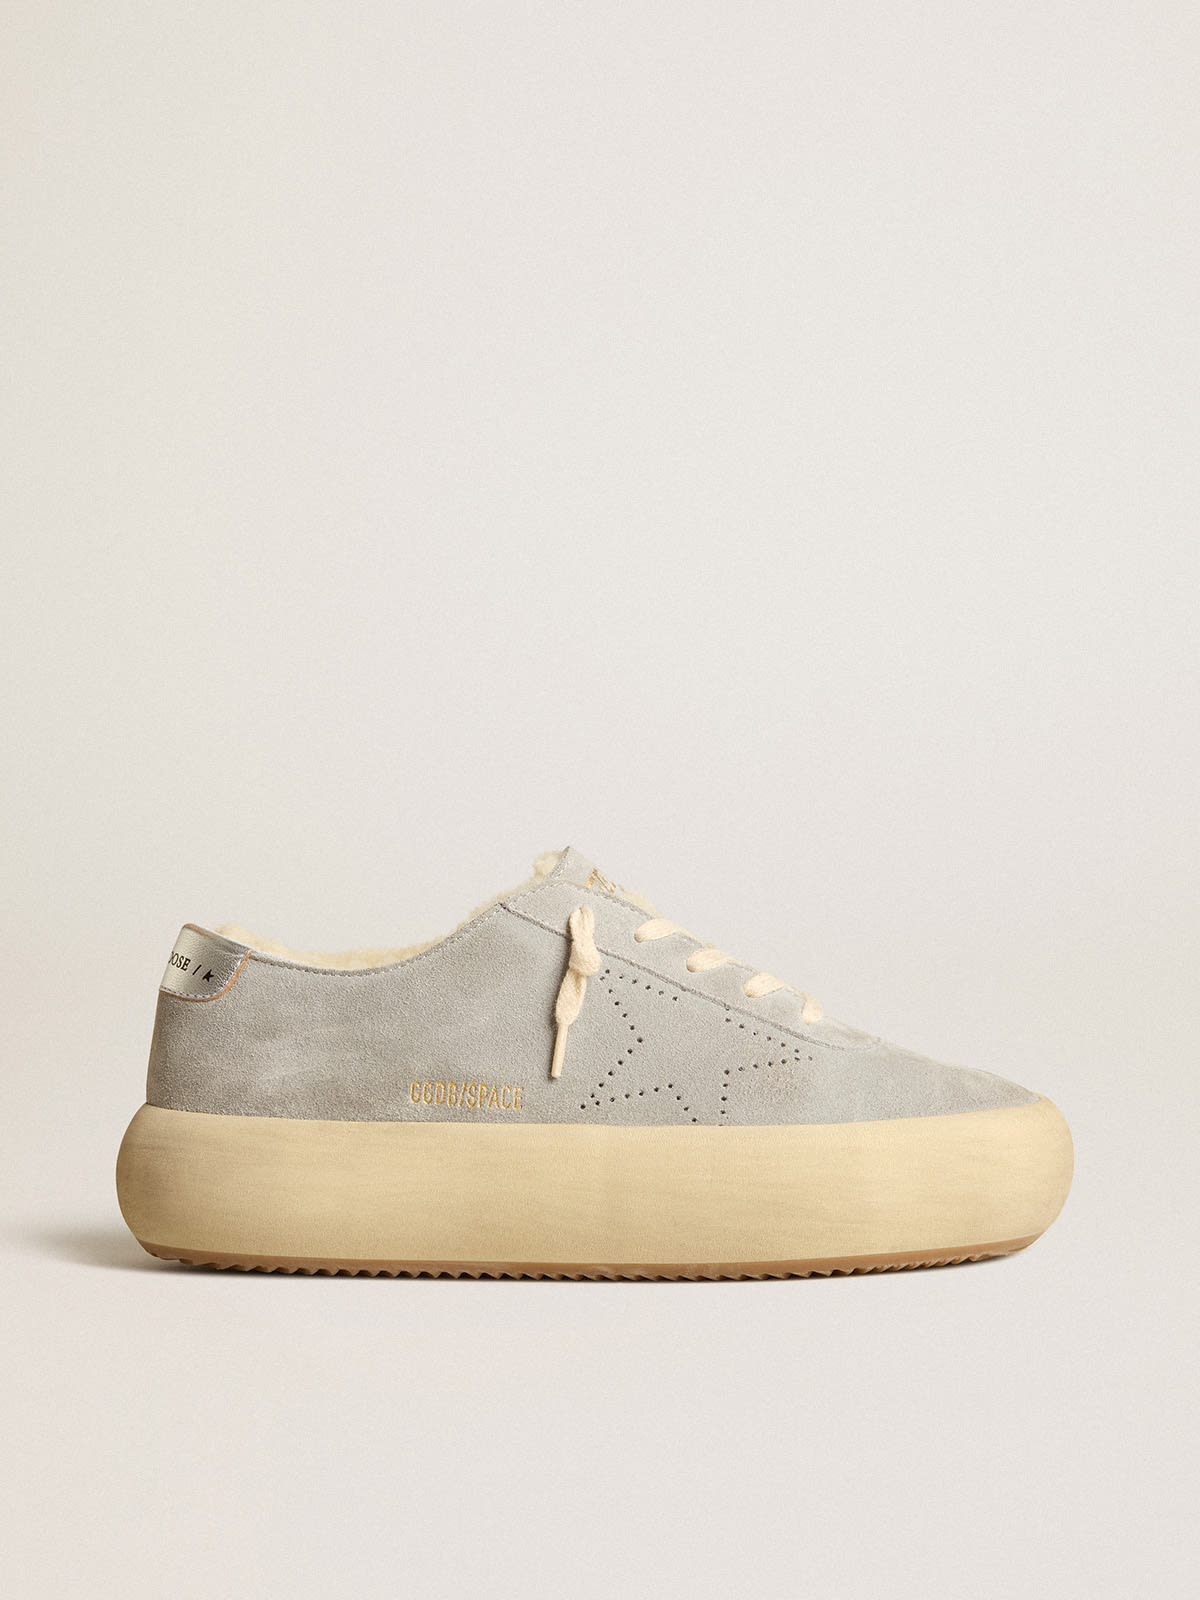 Golden Goose - Women’s Space-Star shoes in ice-gray suede with shearling lining in 